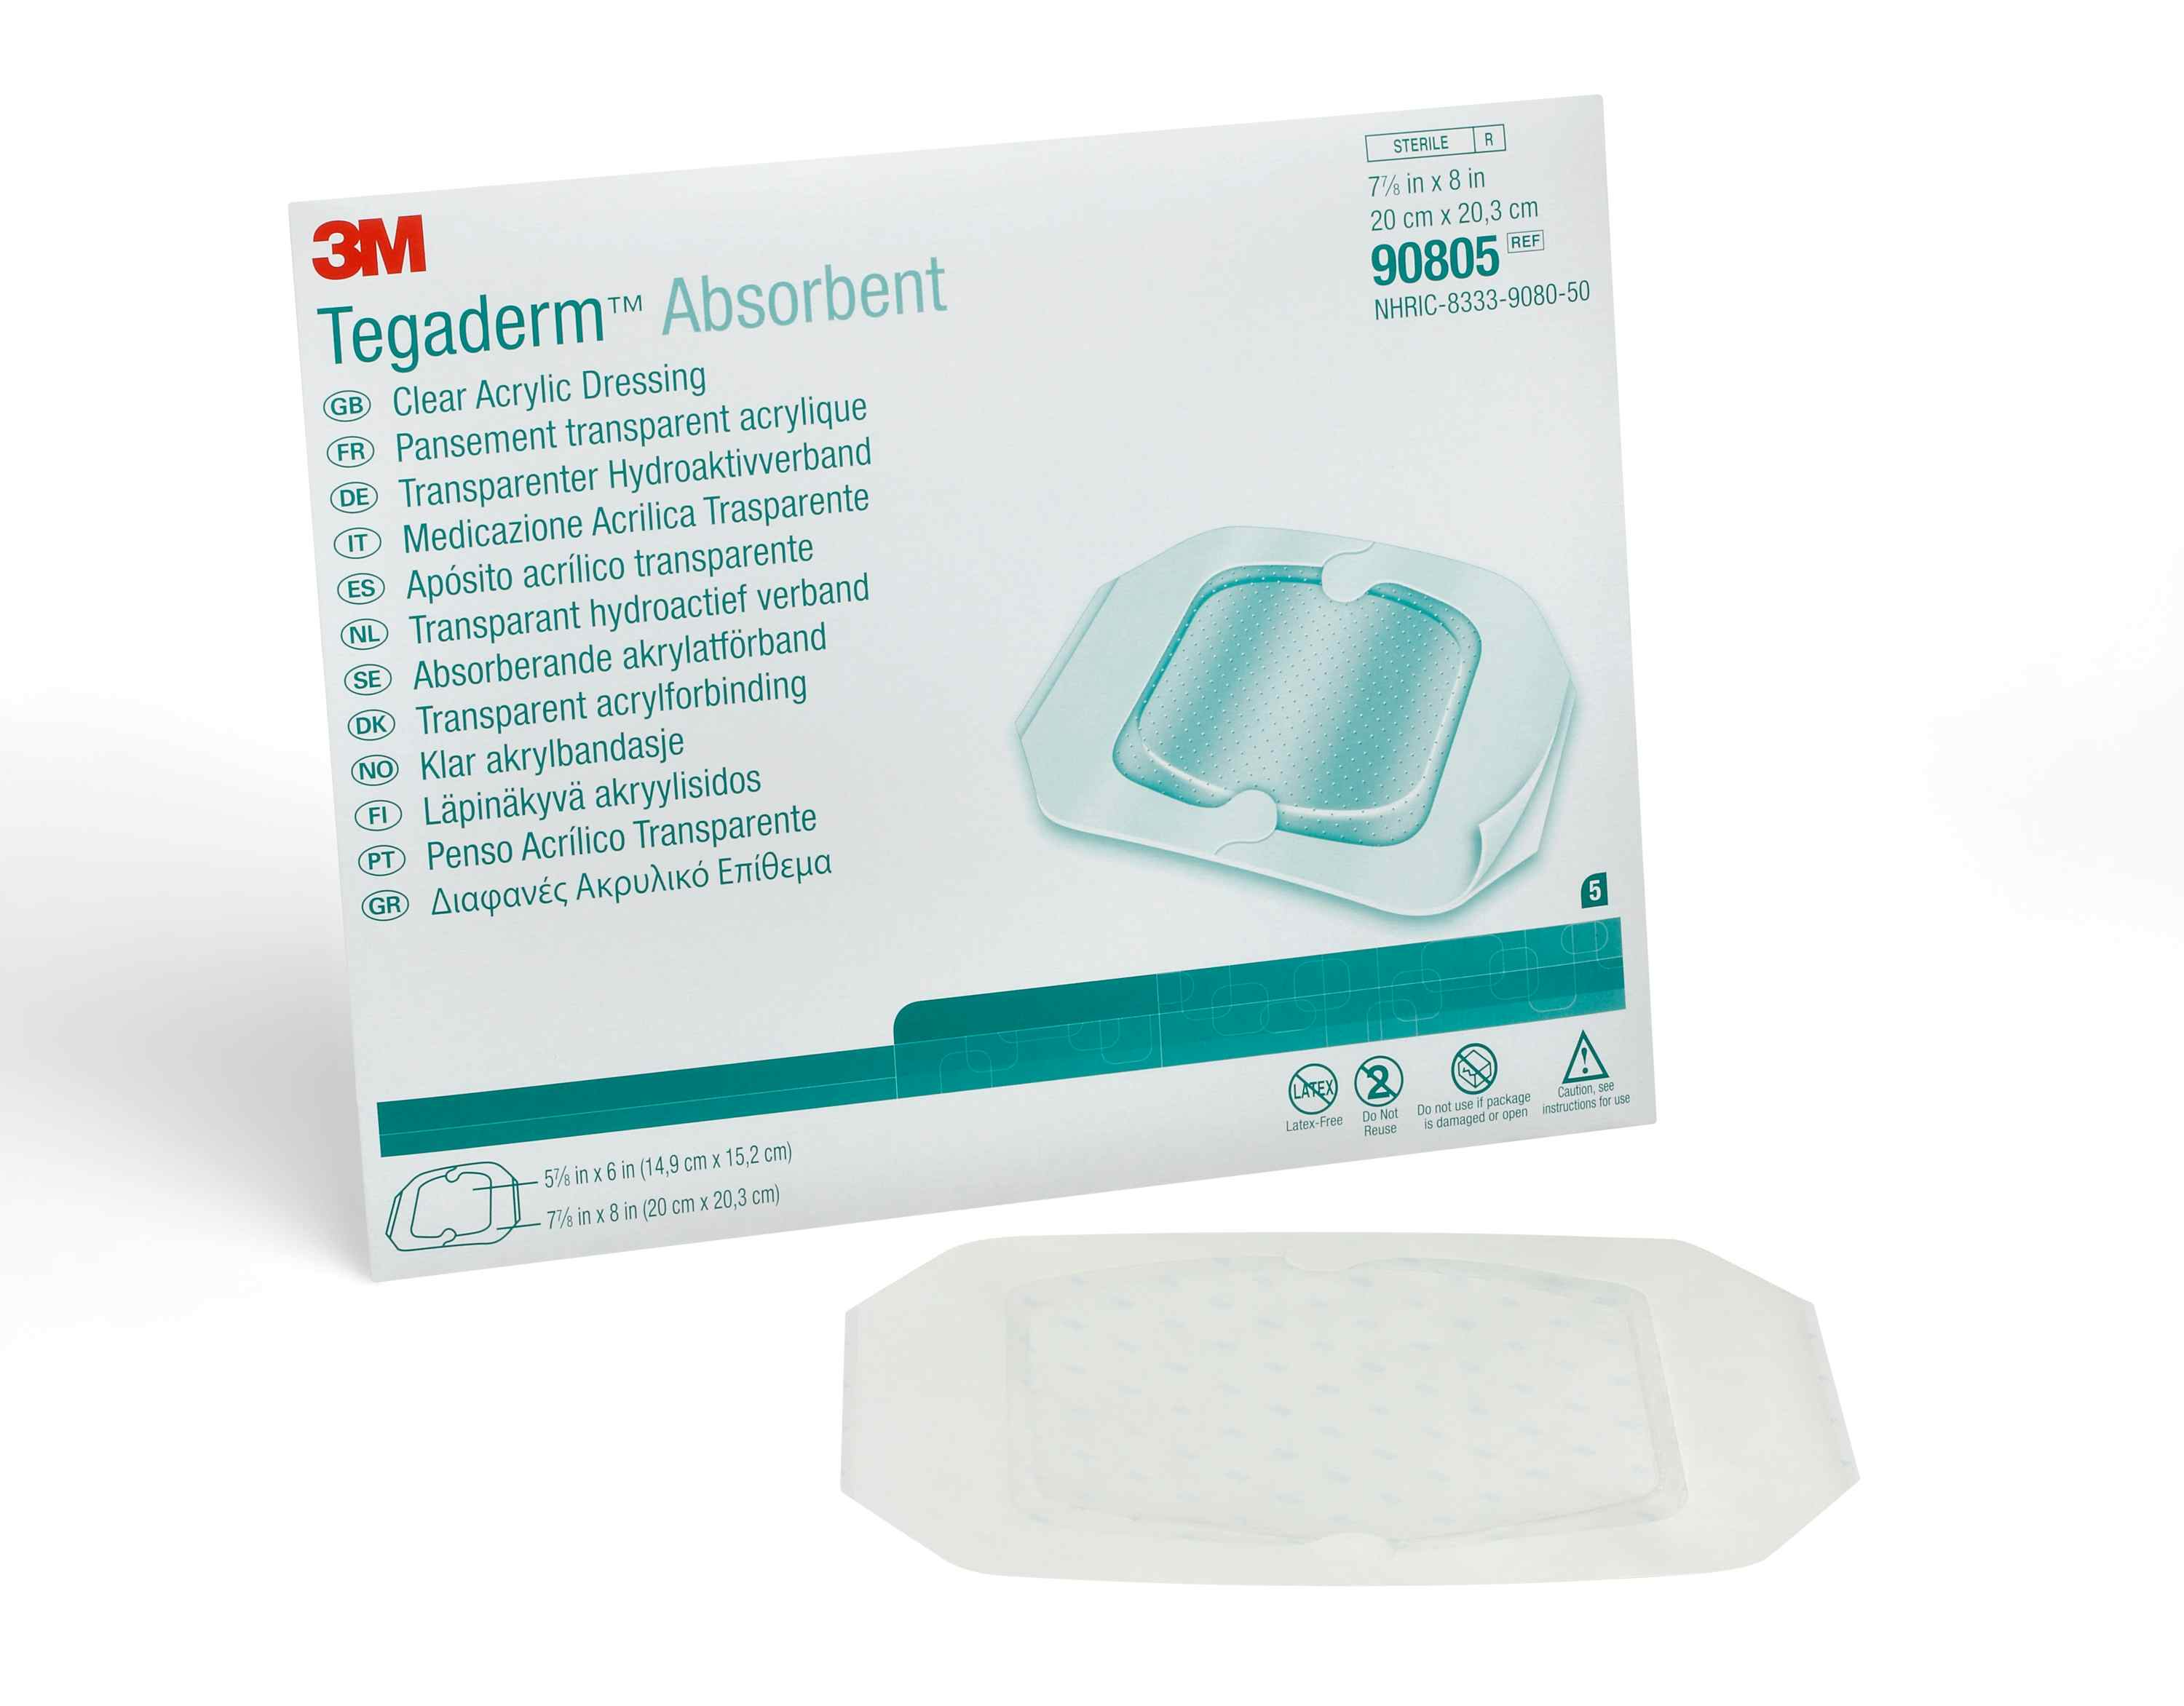 3M Tegaderm Absorbent Clear Acrylic Dressing, 7-7/8 X 8", 90805, Box of 5